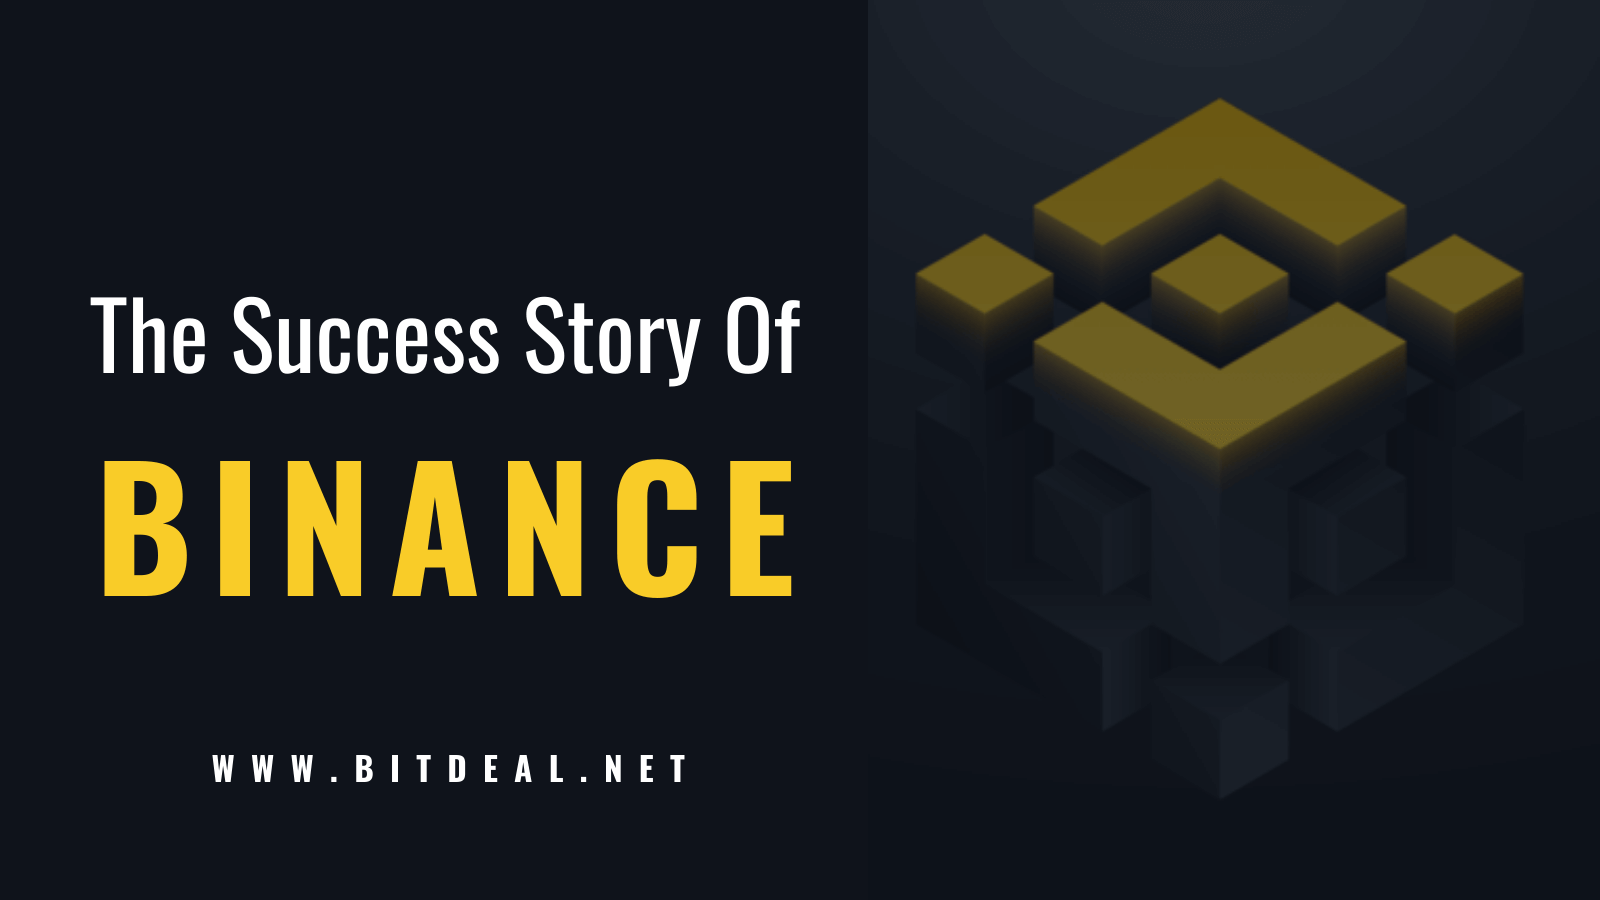 The Epic Story of Binance - From Zero To A Billion Dollar Exchange